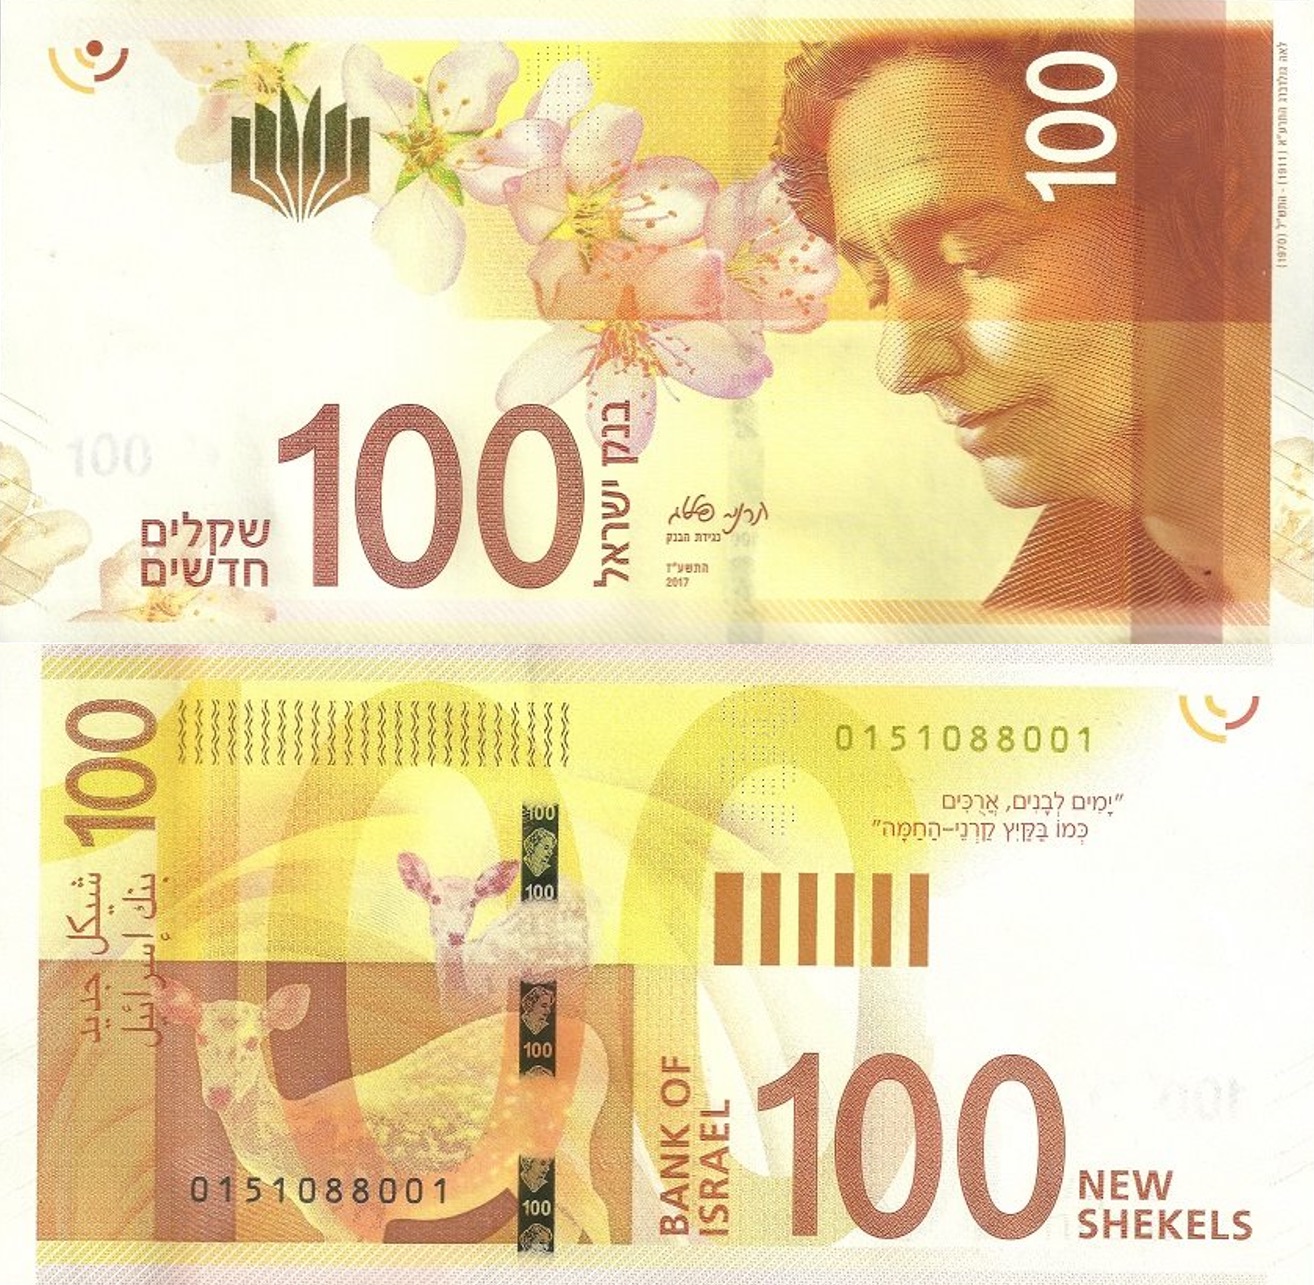 New Shekel Is Introduced